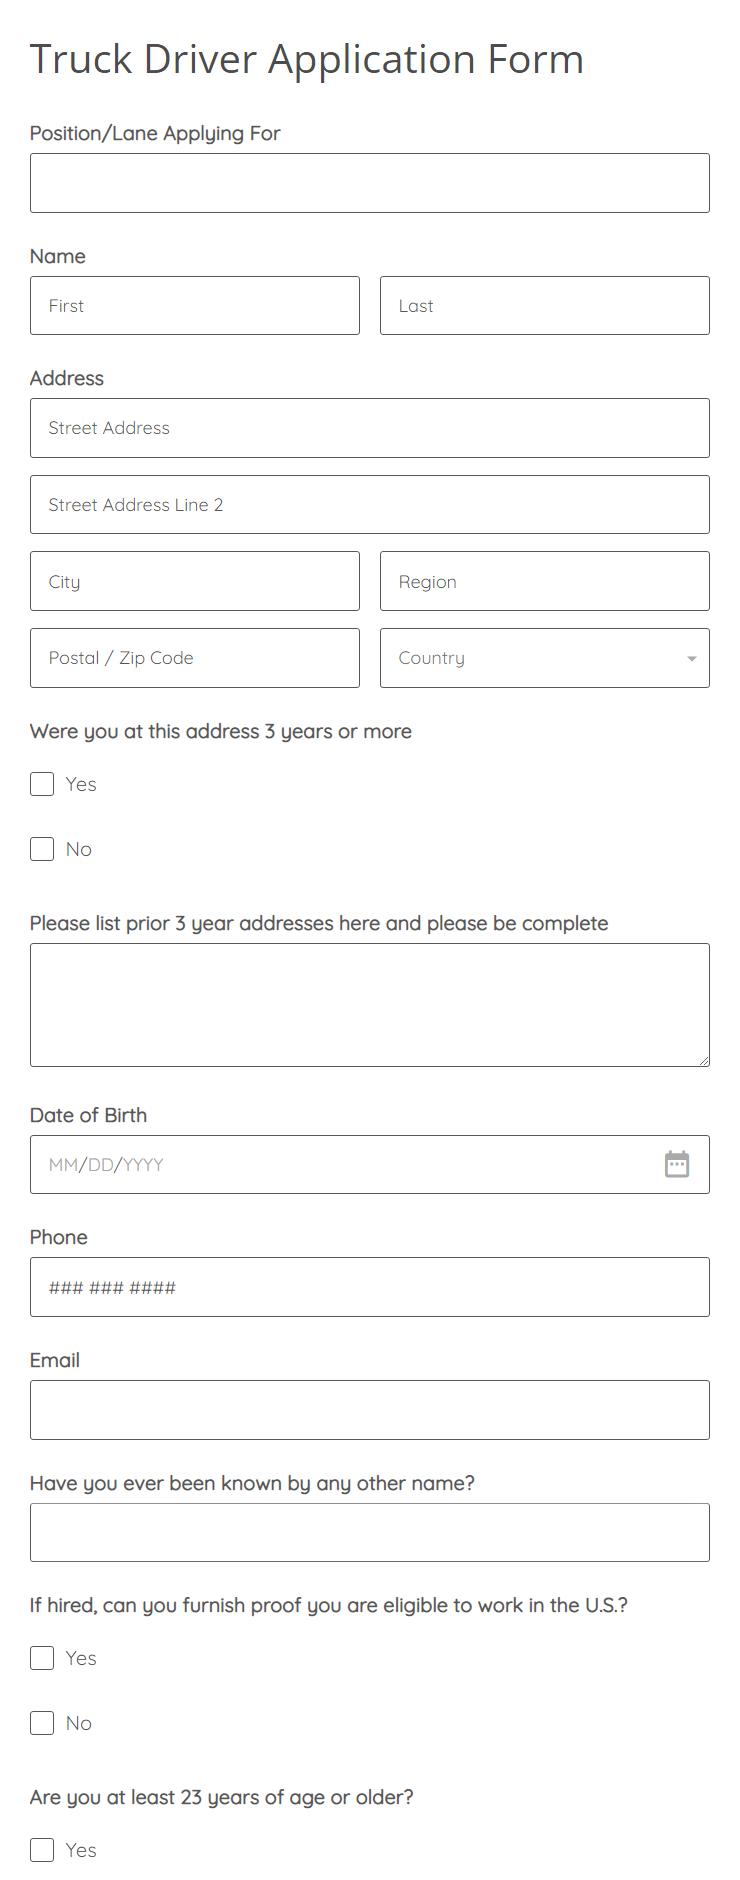 Truck Driver Application Form Template